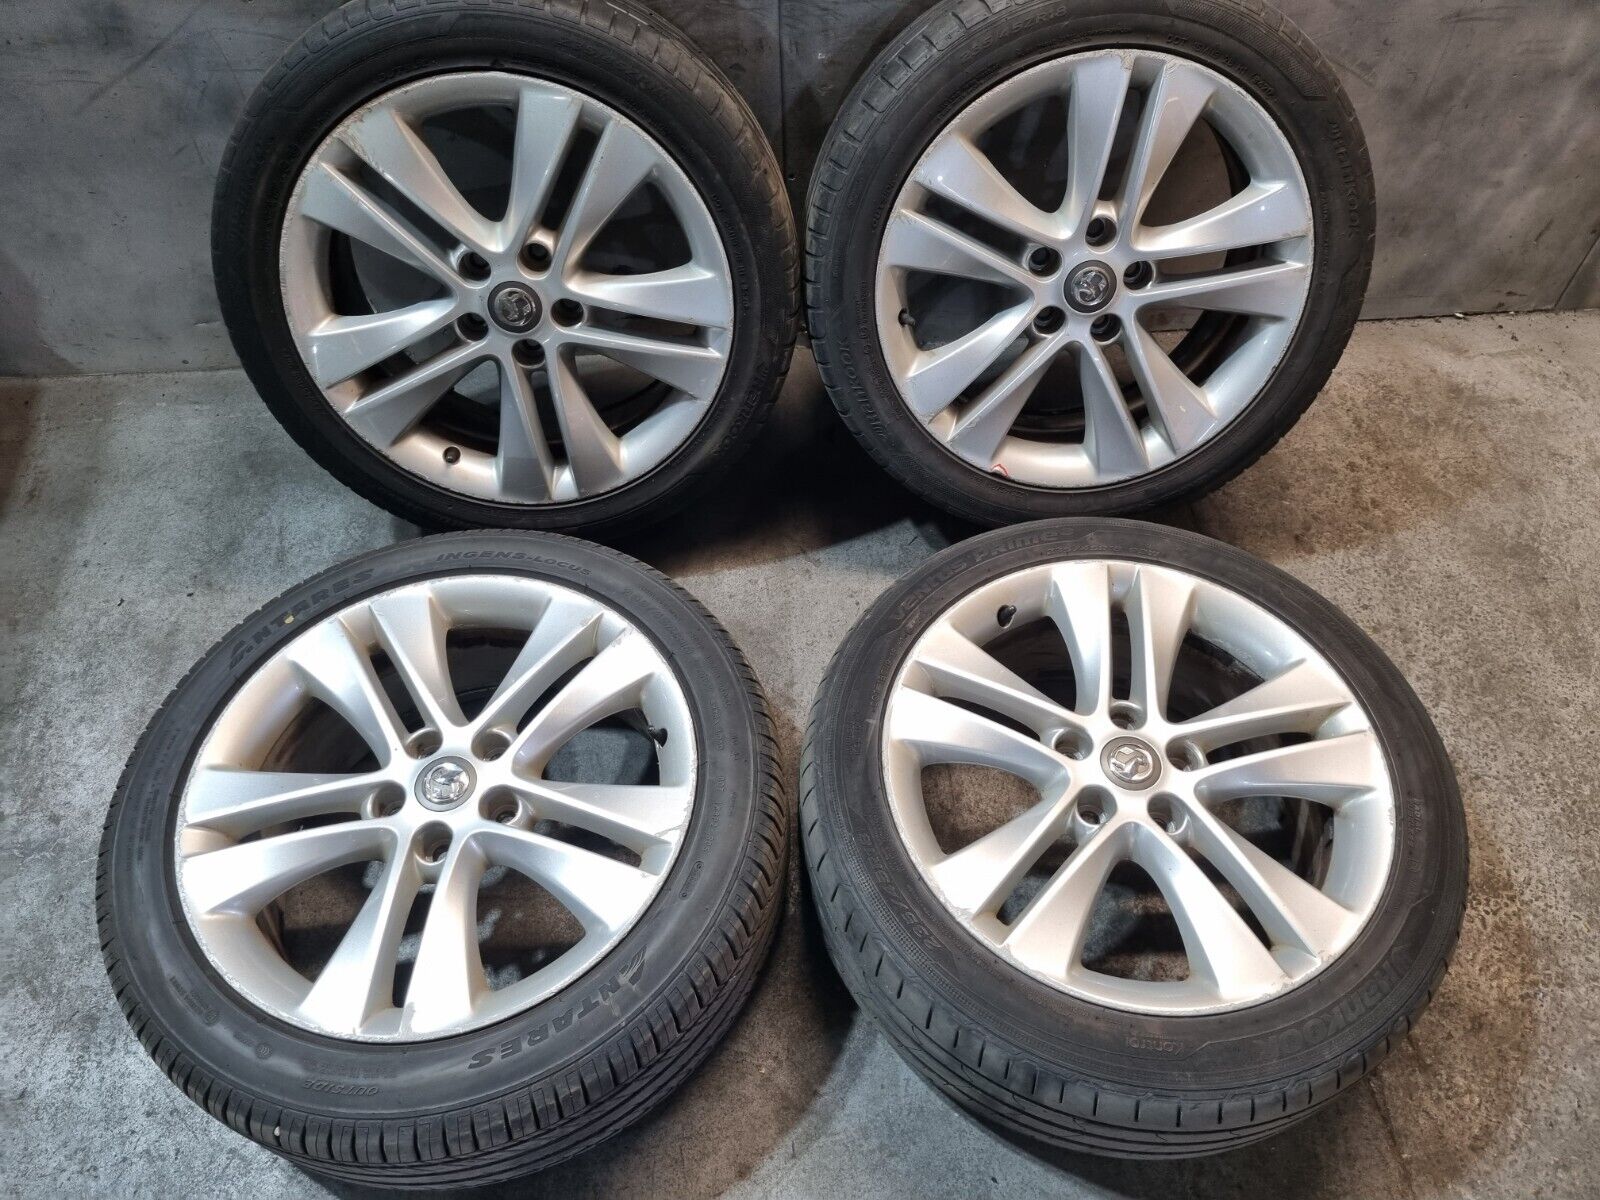 VAUXHALL ZAFIRA C 18 INCH ALLOY WHEELS WITH TYRES SET